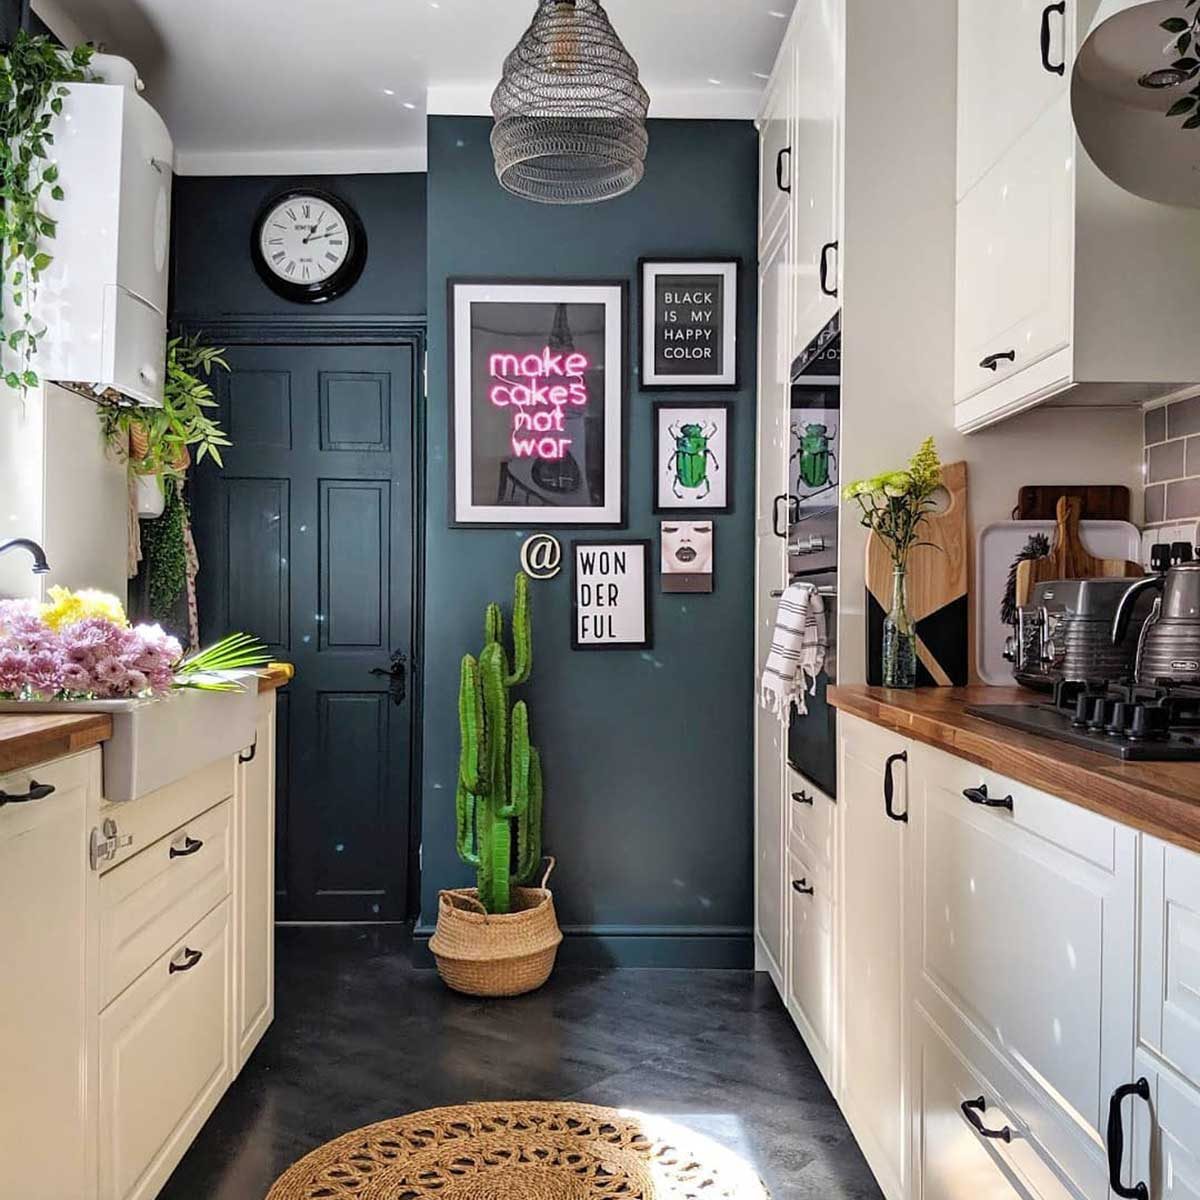 10 Space Saving Hacks For A Compact Kitchen